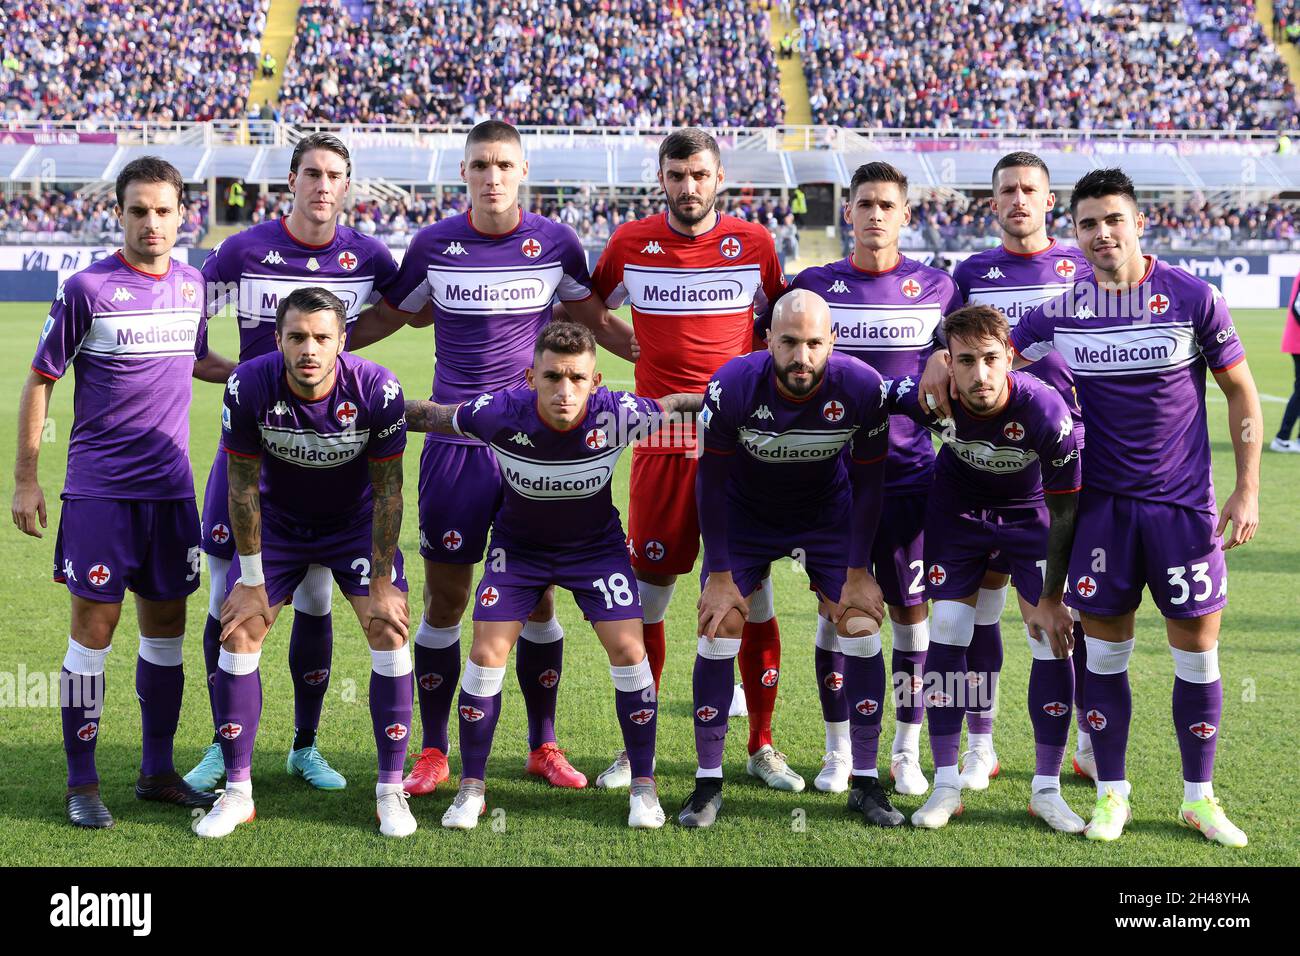 Florence, Italy. 31st Oct, 2021. fiorentina players pose for a team photo  during the Serie A 2021/2022 football match between ACF Fiorentina and  Spezia Calcio at Artemio Franchi stadium in Florence (Italy),